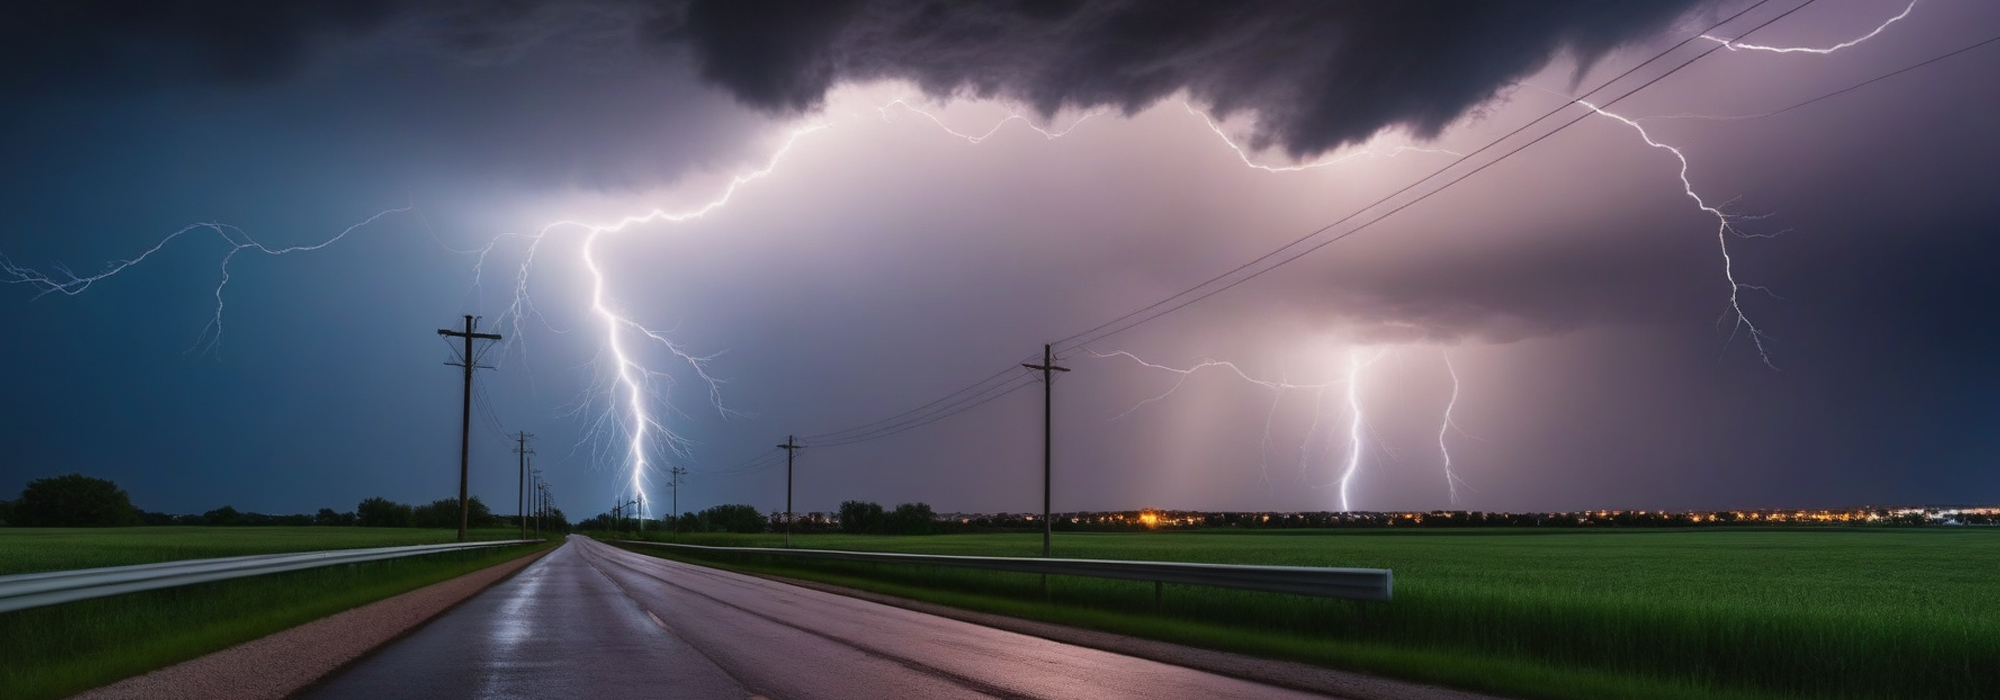 Be Prepared! Top 5 Tips to Ride Out Spring Storms